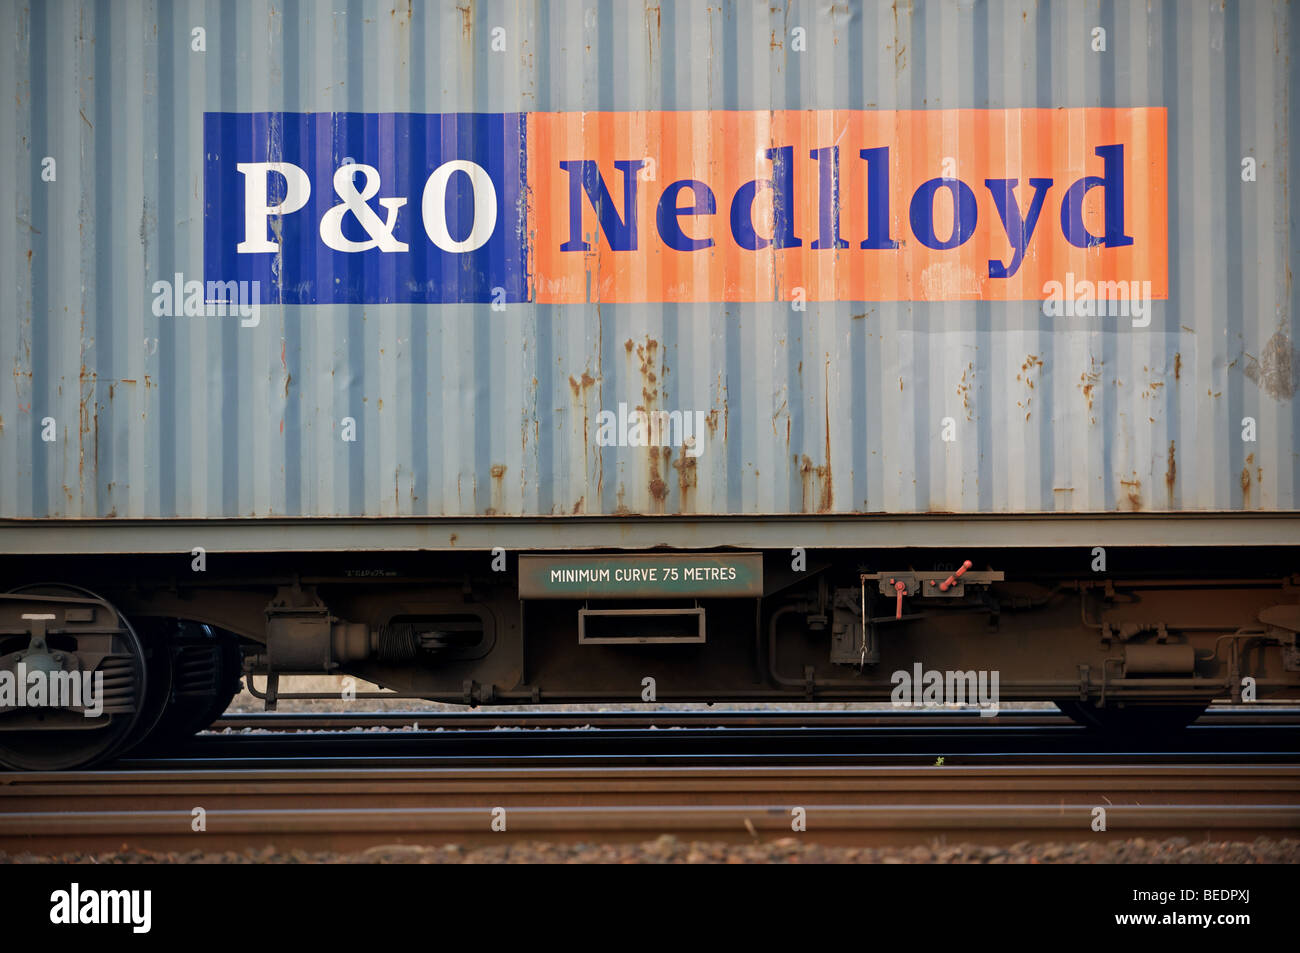 P&O Nedlloyd container onboard a freight train at the port of Felixstowe, Suffolk, UK. Stock Photo